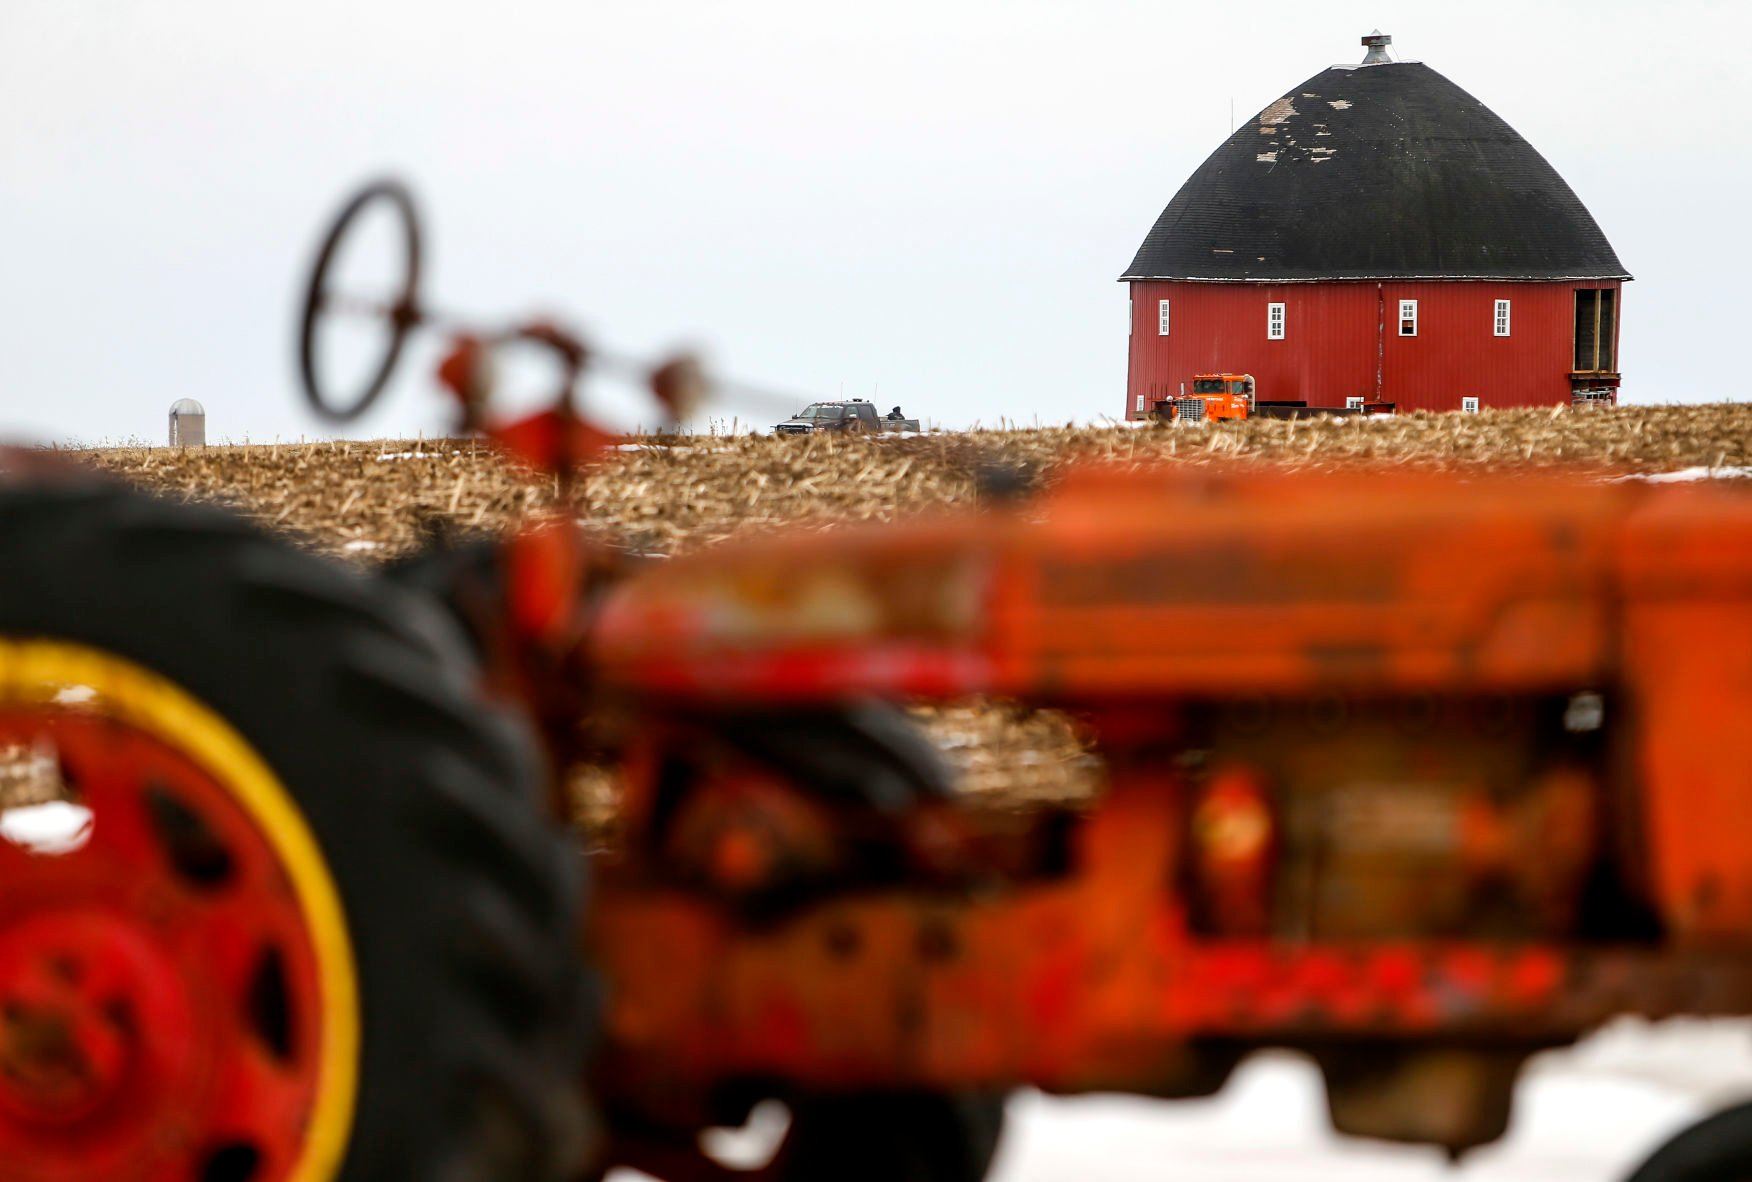 A 60-foot round barn slowly moves across a farm field close to it